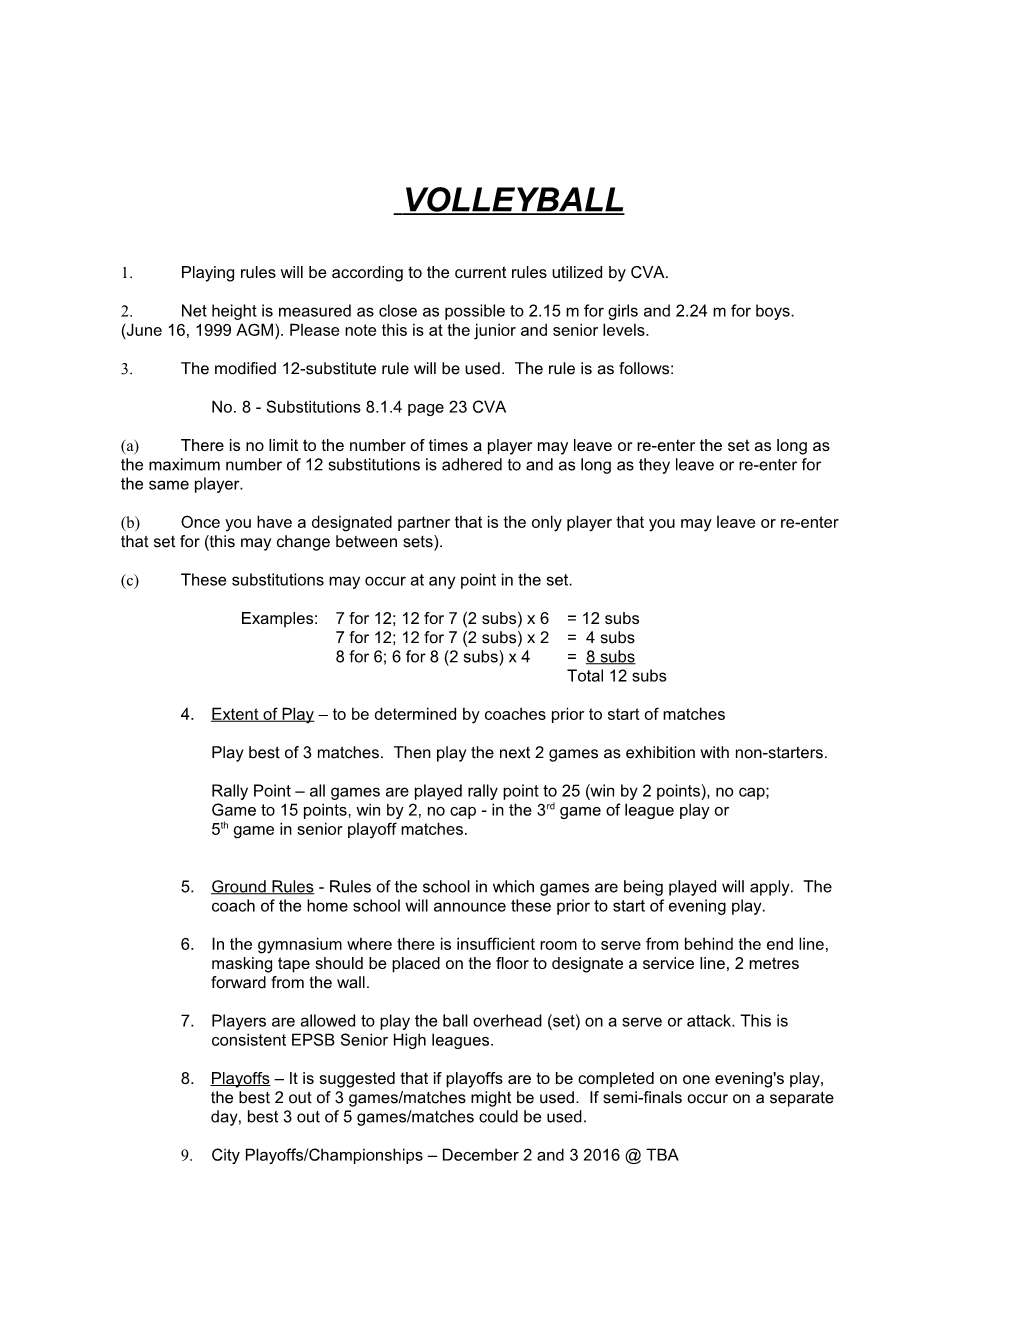 1. Playing Rules Will Be According to the Current Rules Utilized by CVA